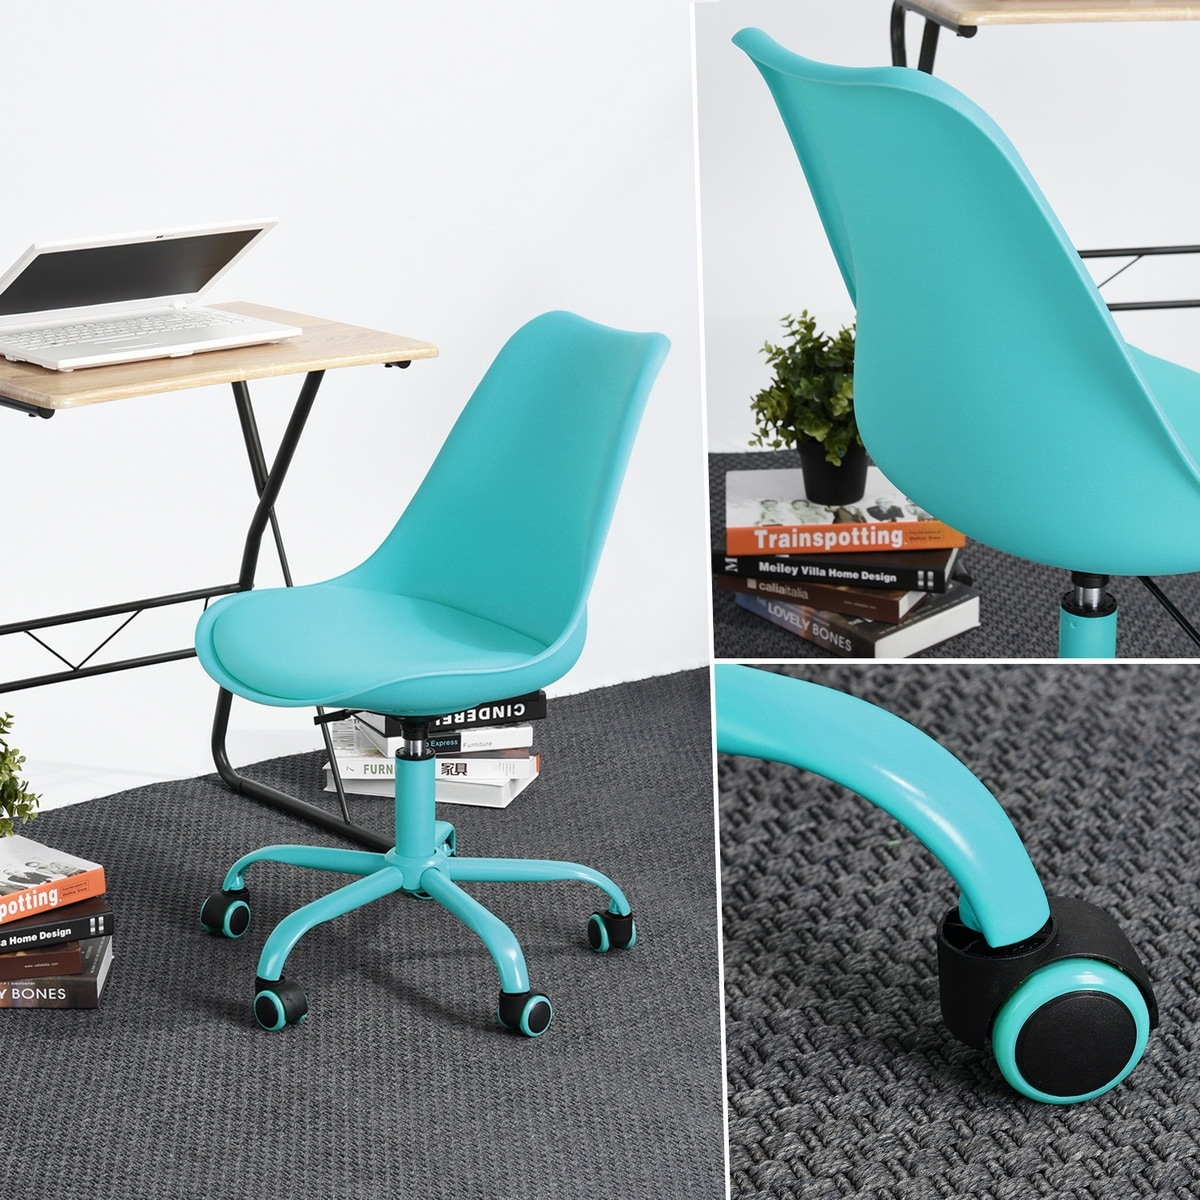 https://ak1.ostkcdn.com/images/products/is/images/direct/44e1f3939b5463a7b68f1cd298605e25481d5281/Modern-Swivel-Desk-Chair%2C-Office-Chair%2C-Waterproof-and-Silent-PU-Wheel%2C-Ergonomic-PP-Seat-Cushion-Desk-Chairs.jpg